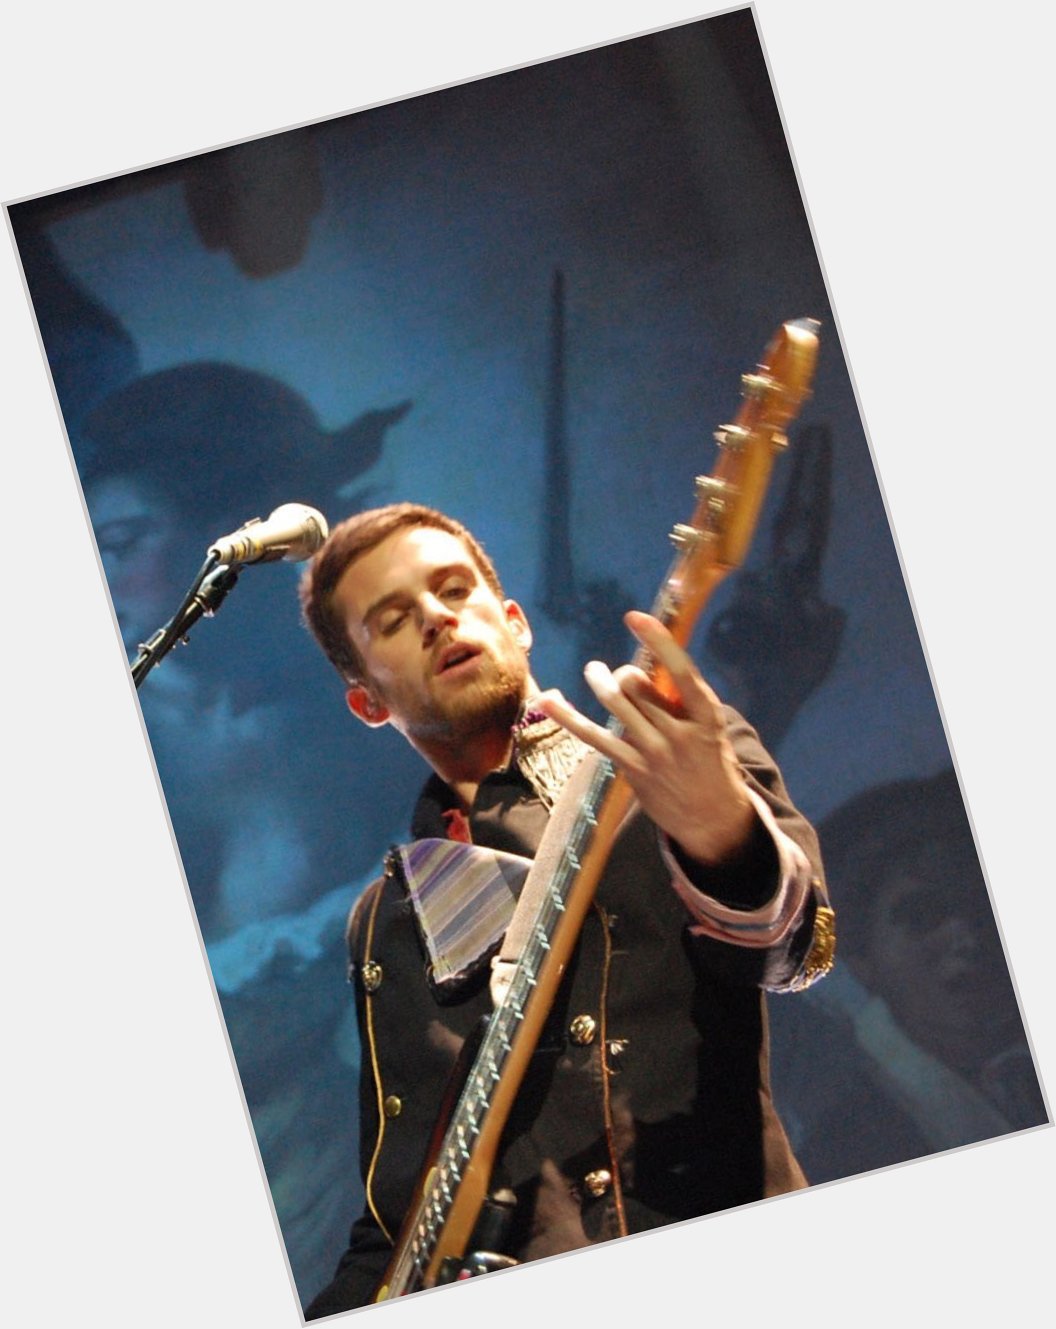 Happy Birthday, Guy Berryman Coldplay\s extremely creative Scottish bass player turns 41 today       